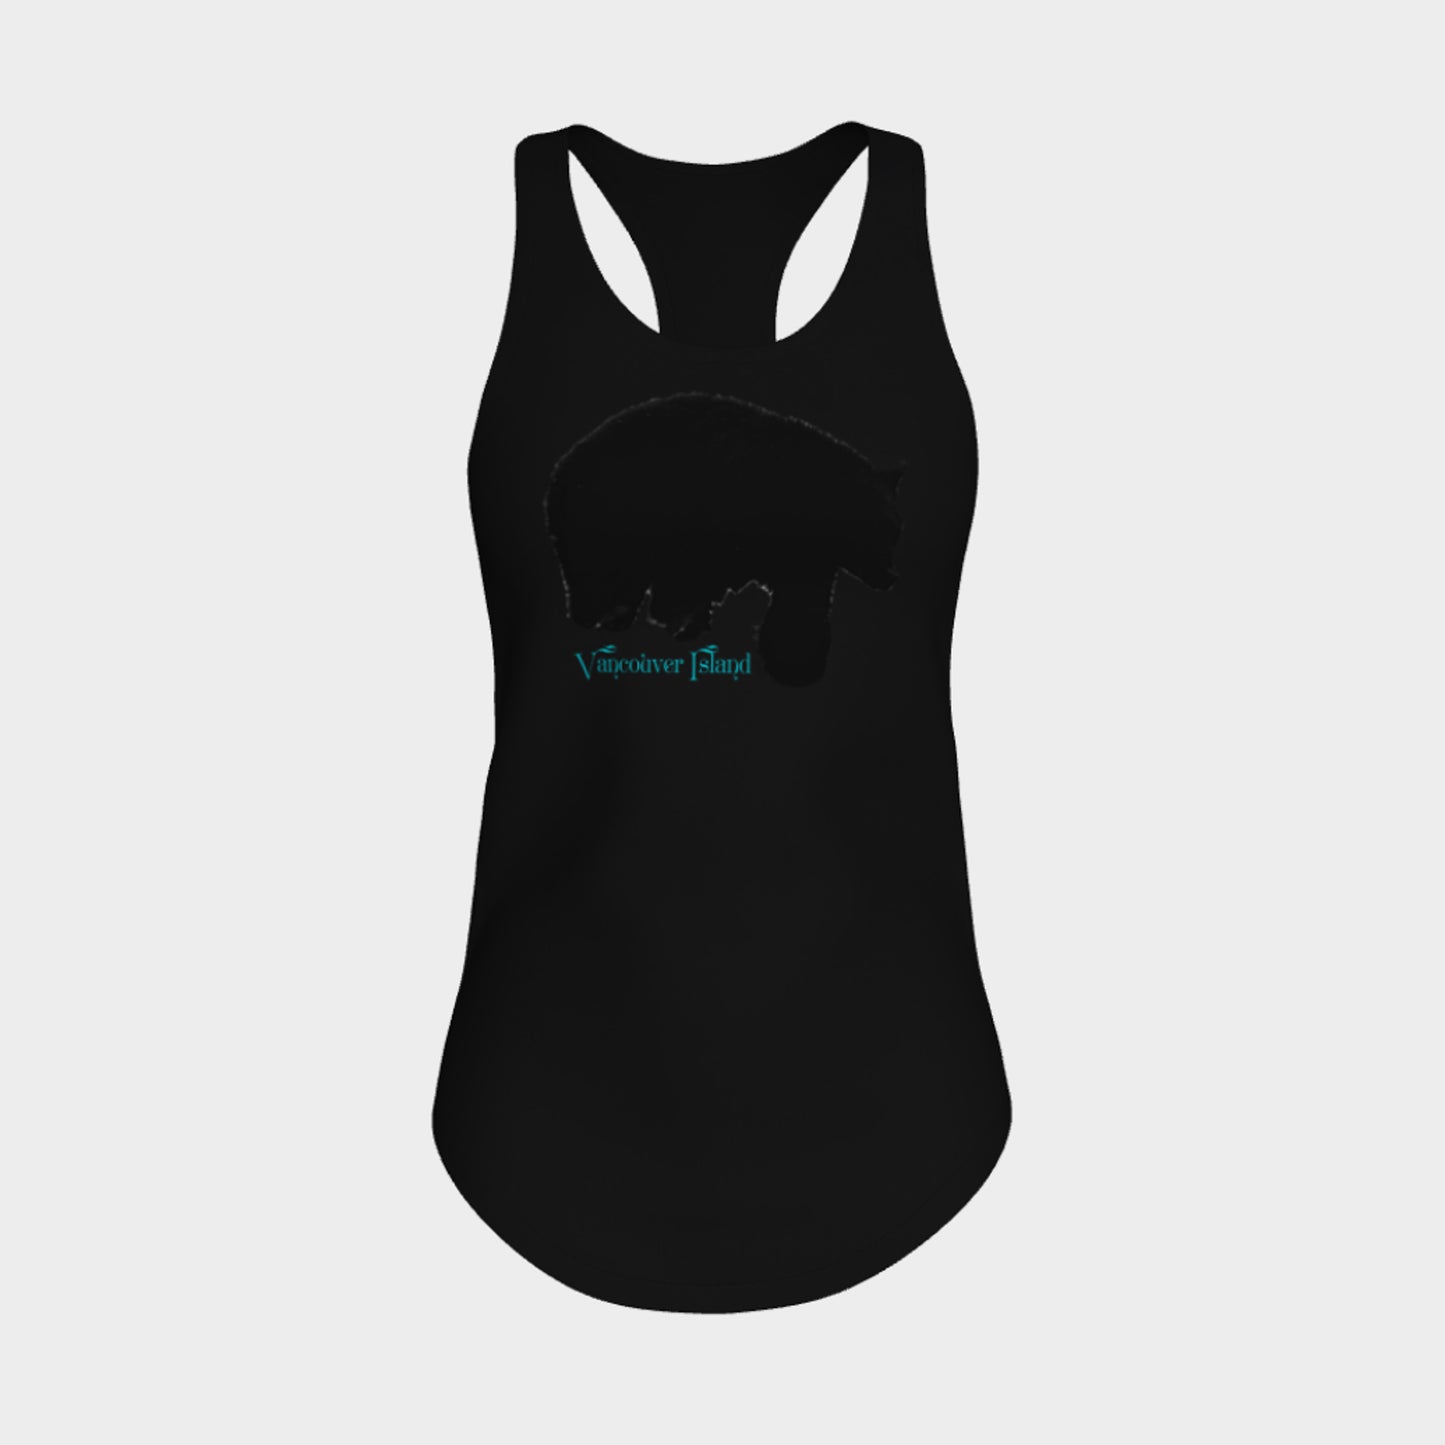 Bear Vancouver Island Racerback Tank Top by VanIsleGoddess.Com available in summer colours.